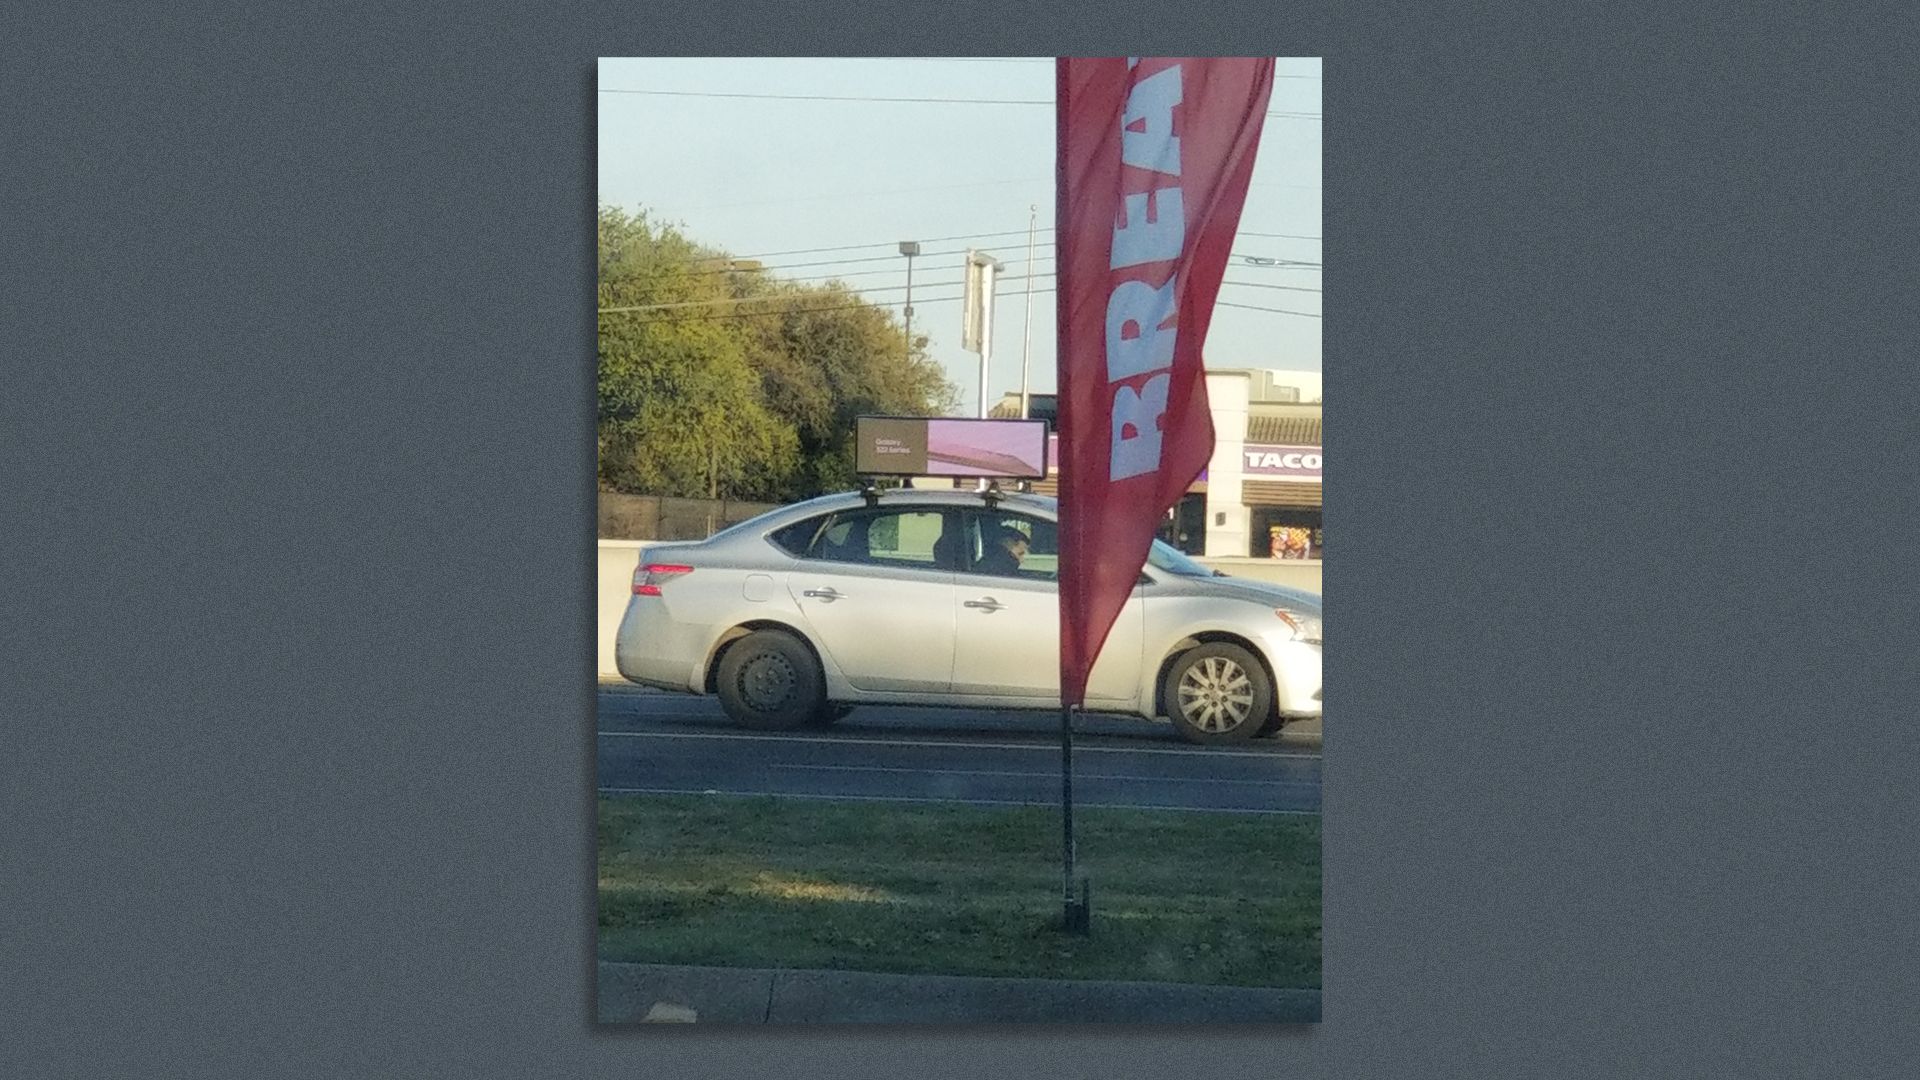 A car with an advertising banner on top.